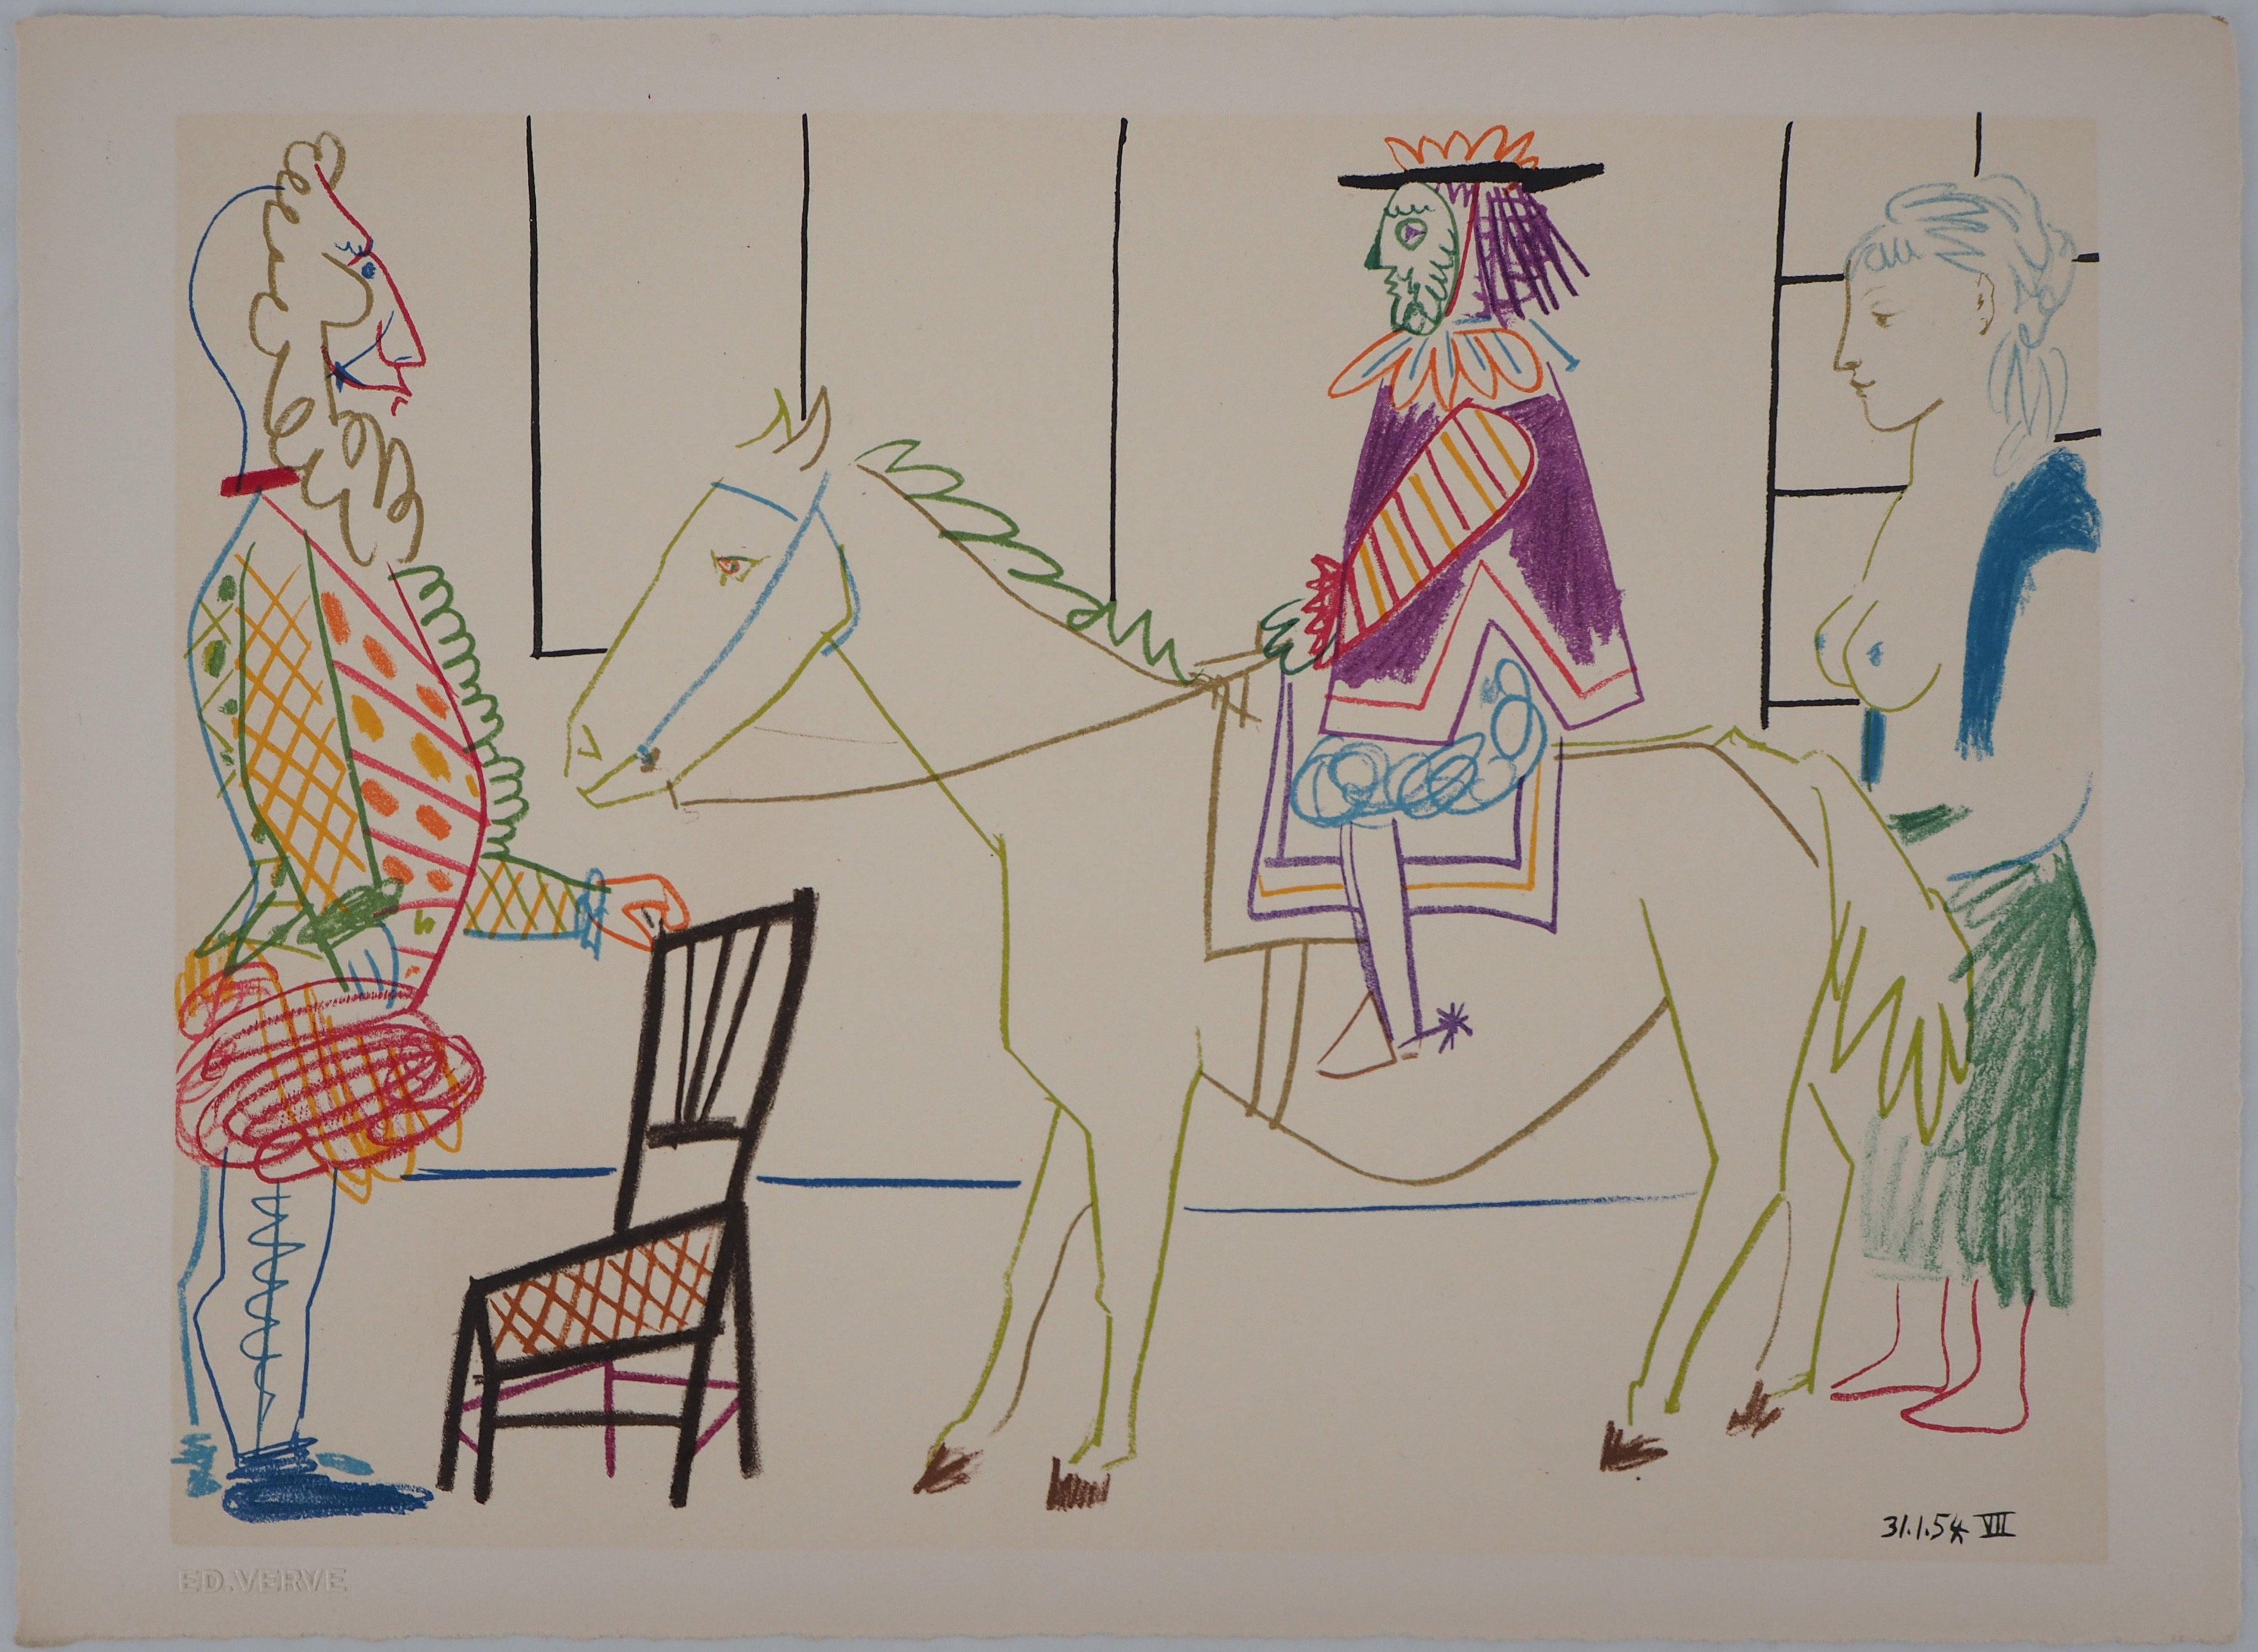 The Parade - Lithograph on Wove Paper - Verve, Mourlot  - Print by (after) Pablo Picasso